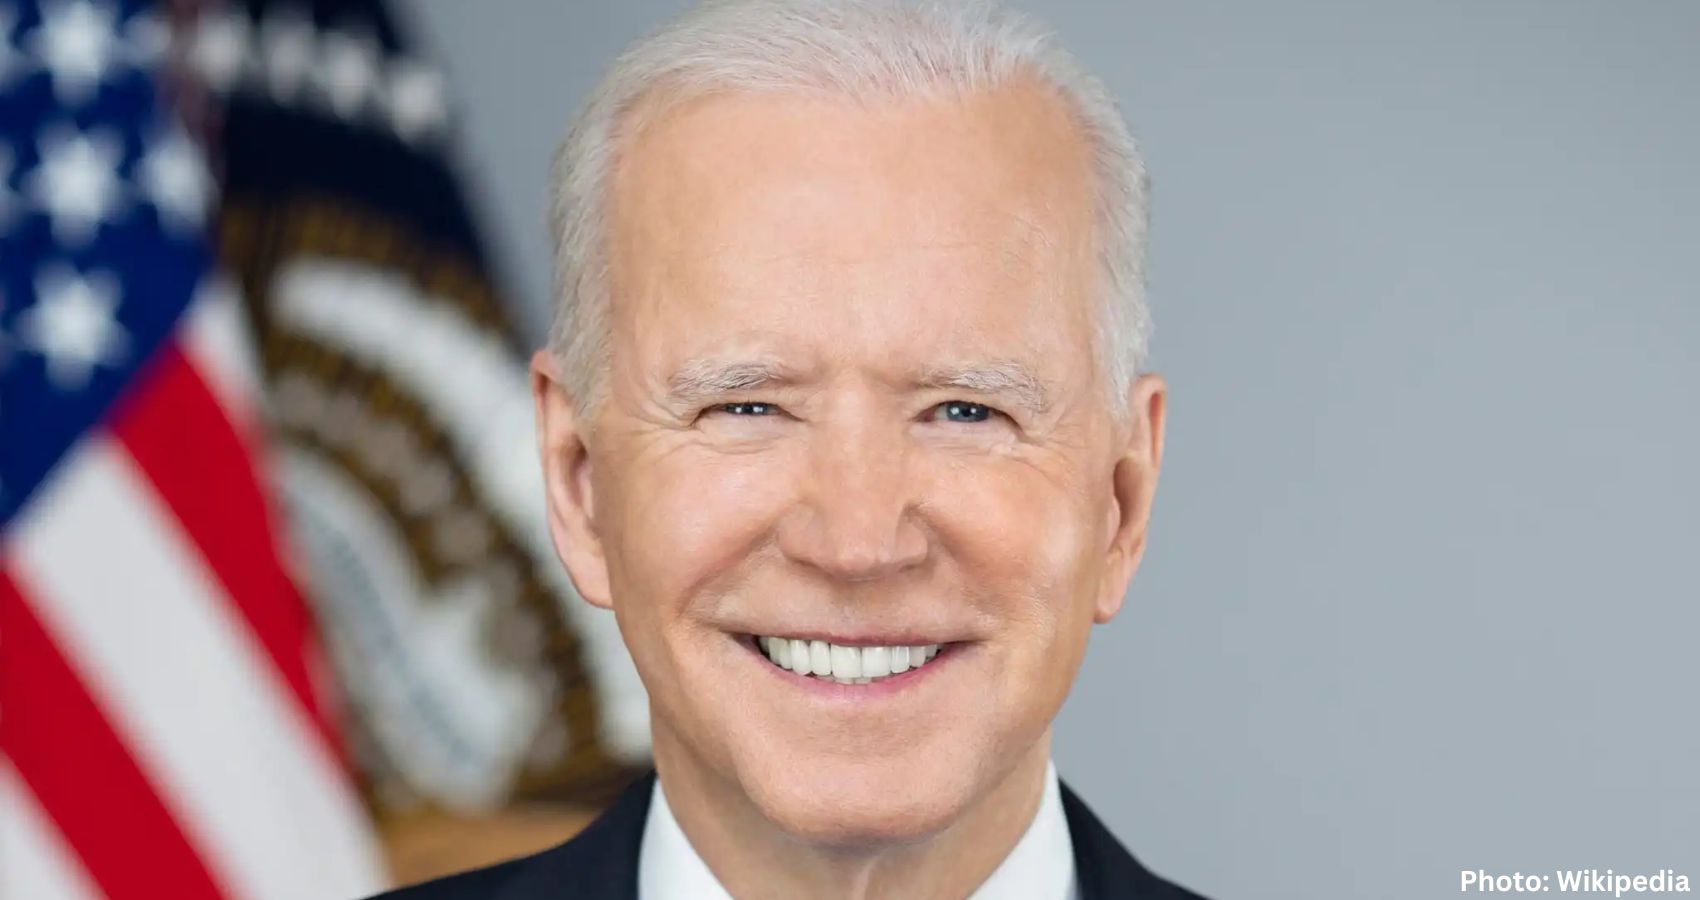 Feature and Cover Democrats Evaluate Potential Successors Amid Speculation Over Biden's Future in 2024 Race